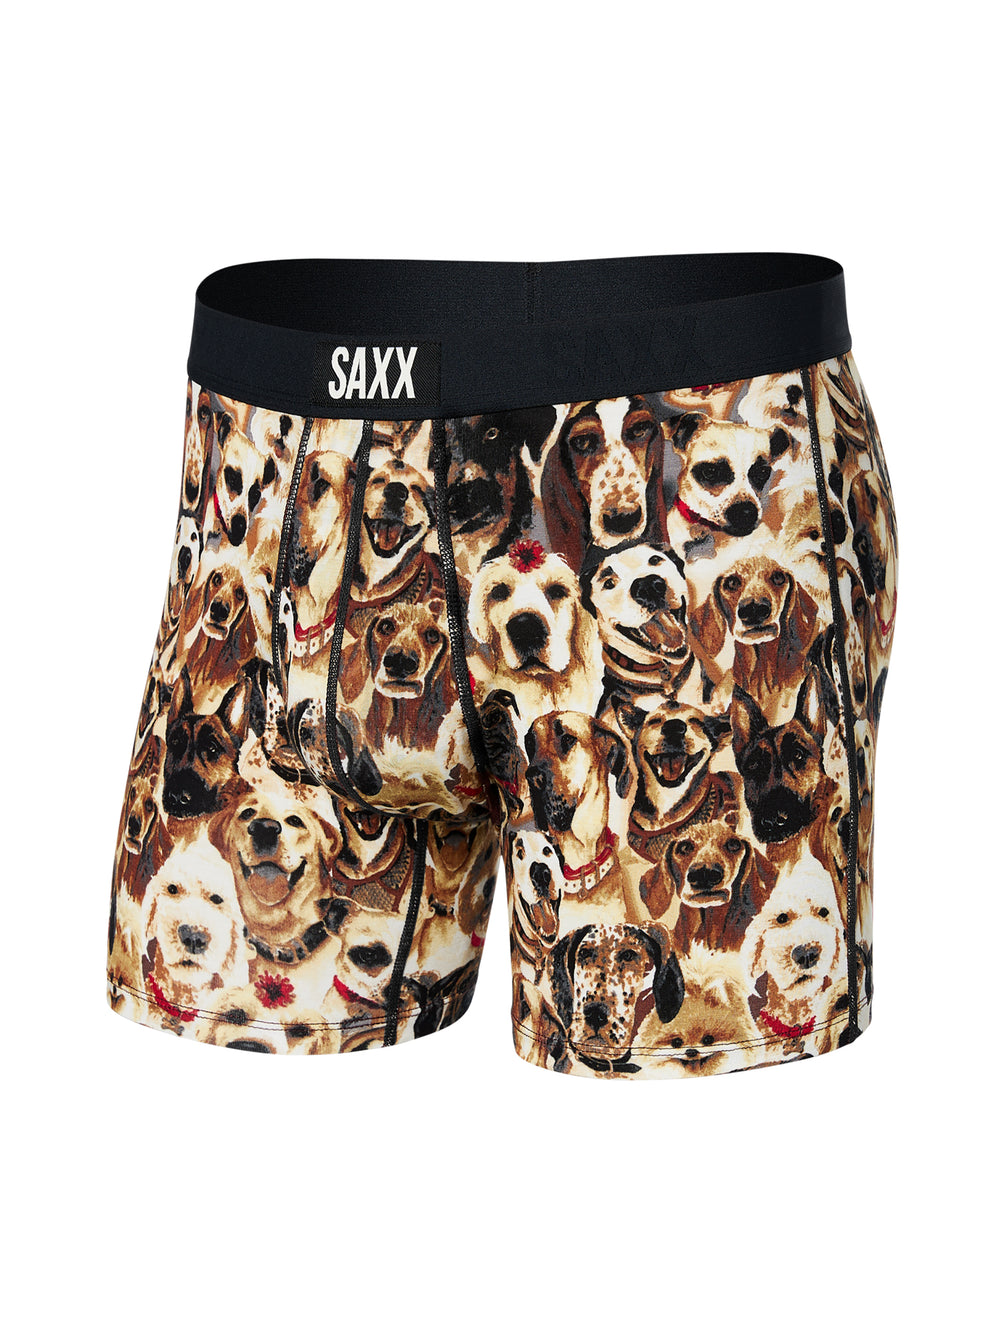 Moisture Wicking Boxer Briefs (High Quality) - Bunch of Animals